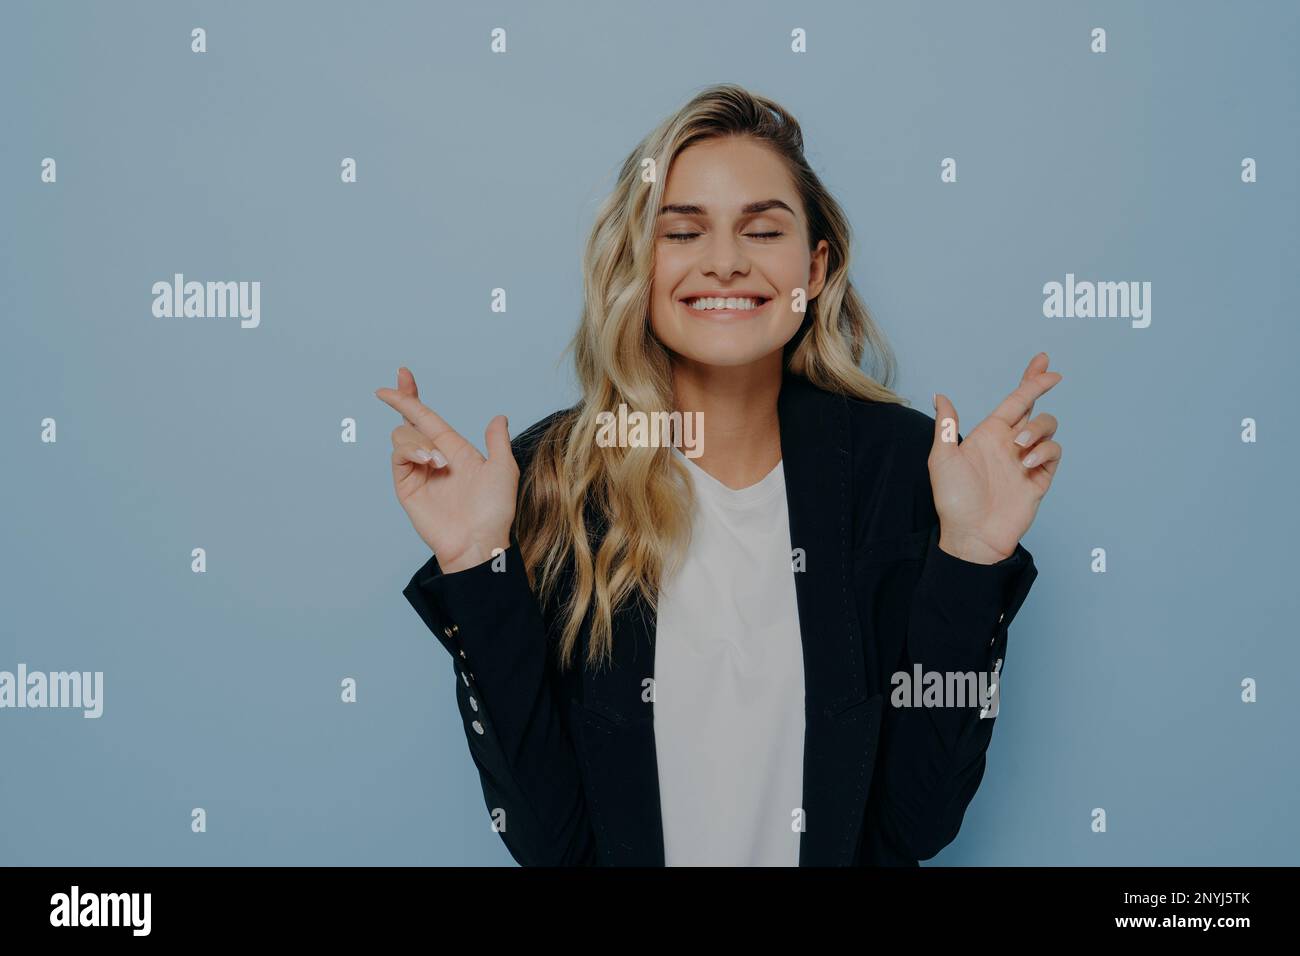 Superstitious young student girl with blond hair crossing fingers with both hands, invoking good luck before important exam or event, hopes for victor Stock Photo